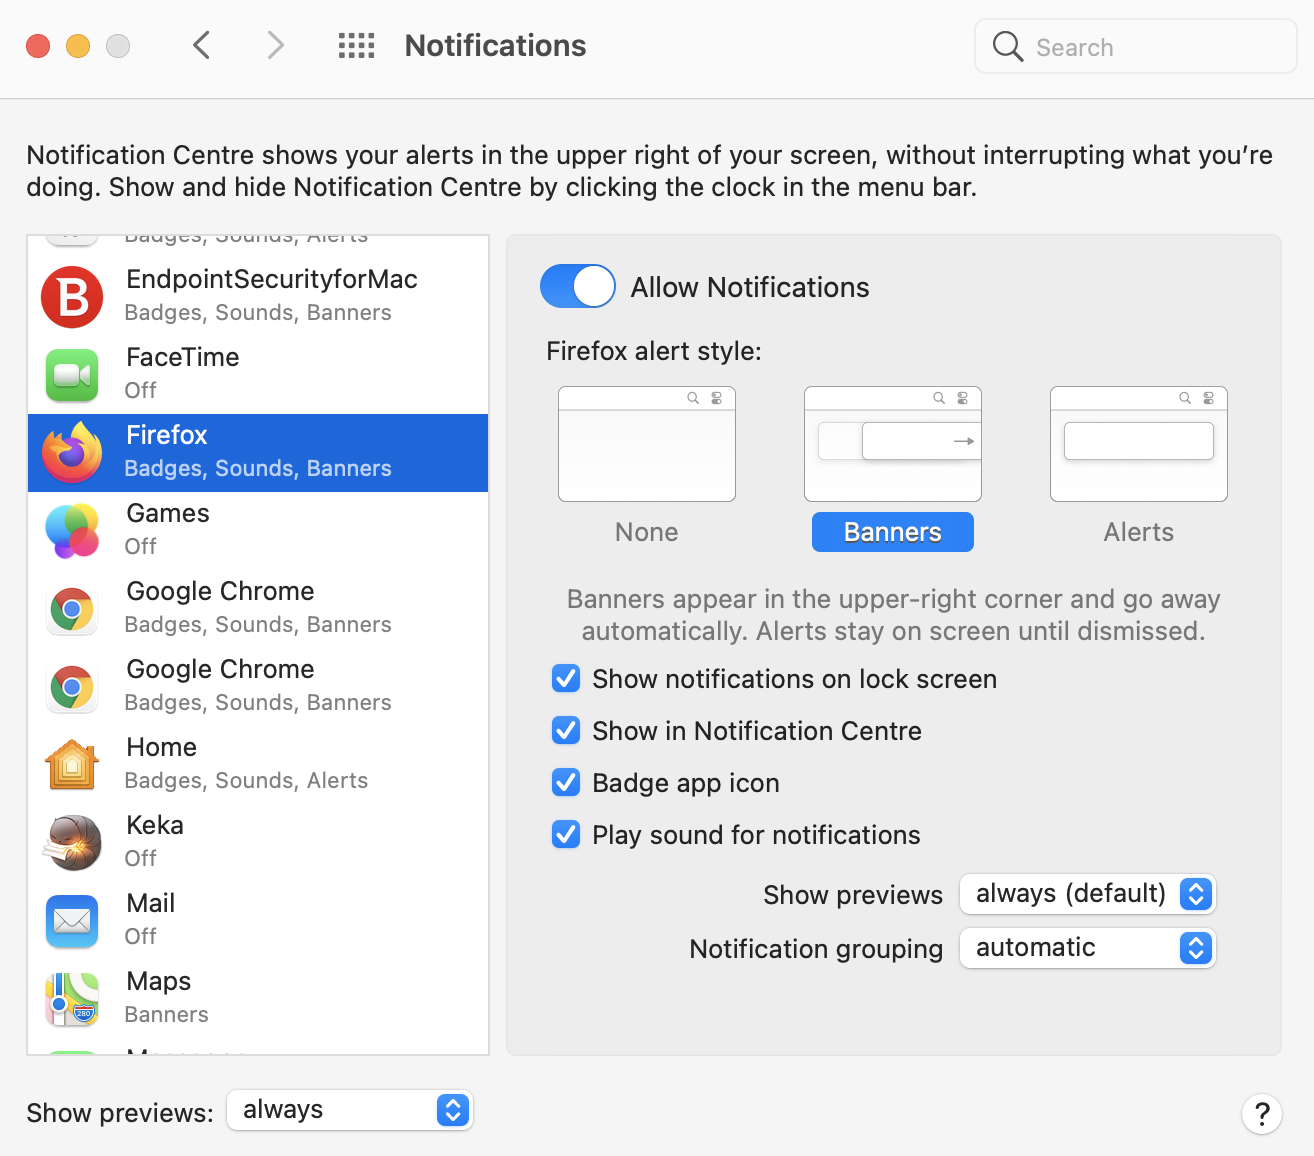 In this example, notifications for Firefox on Mac are allowed.